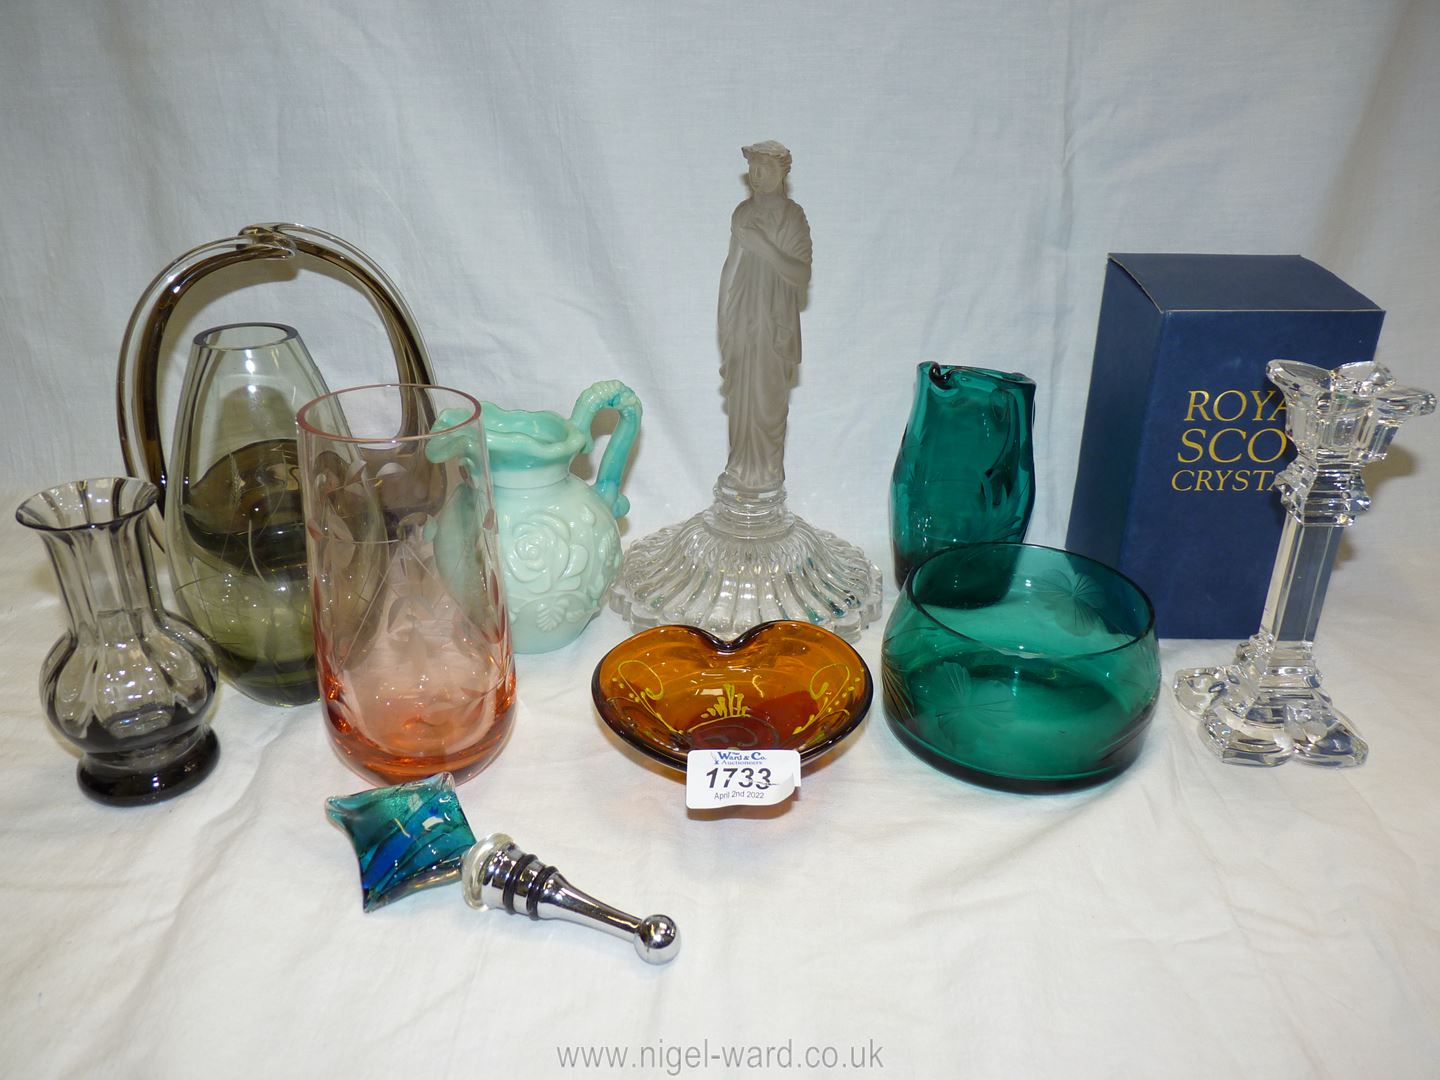 A small quantity of glass including Royal Scot vase, boxed, teal coloured bowl and small jug, - Image 2 of 2